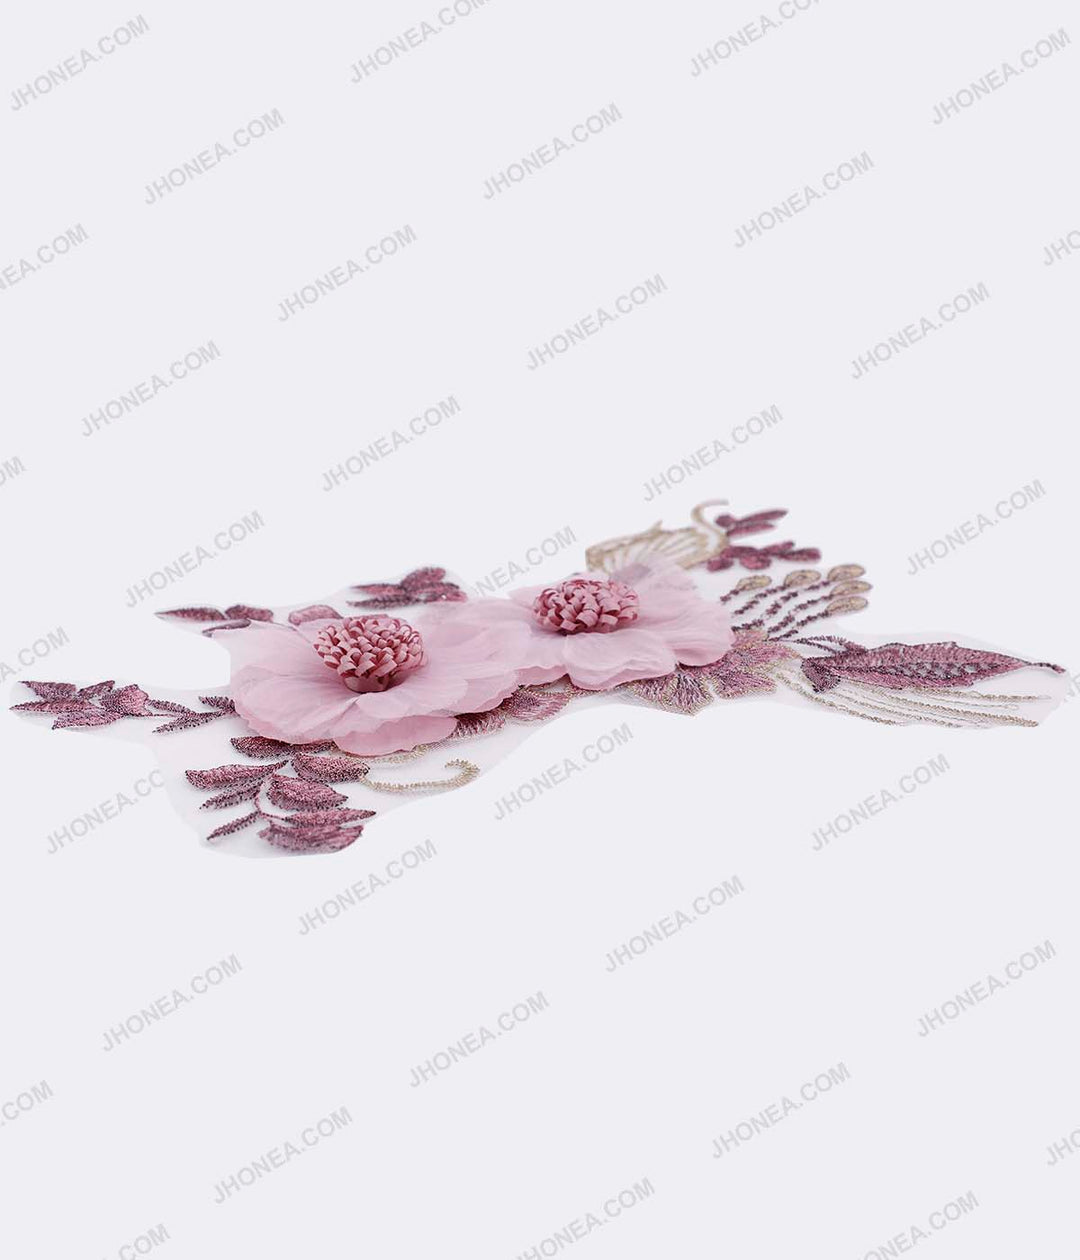 Pastel Shades Flower Embroidery Patch for Bridal Gowns